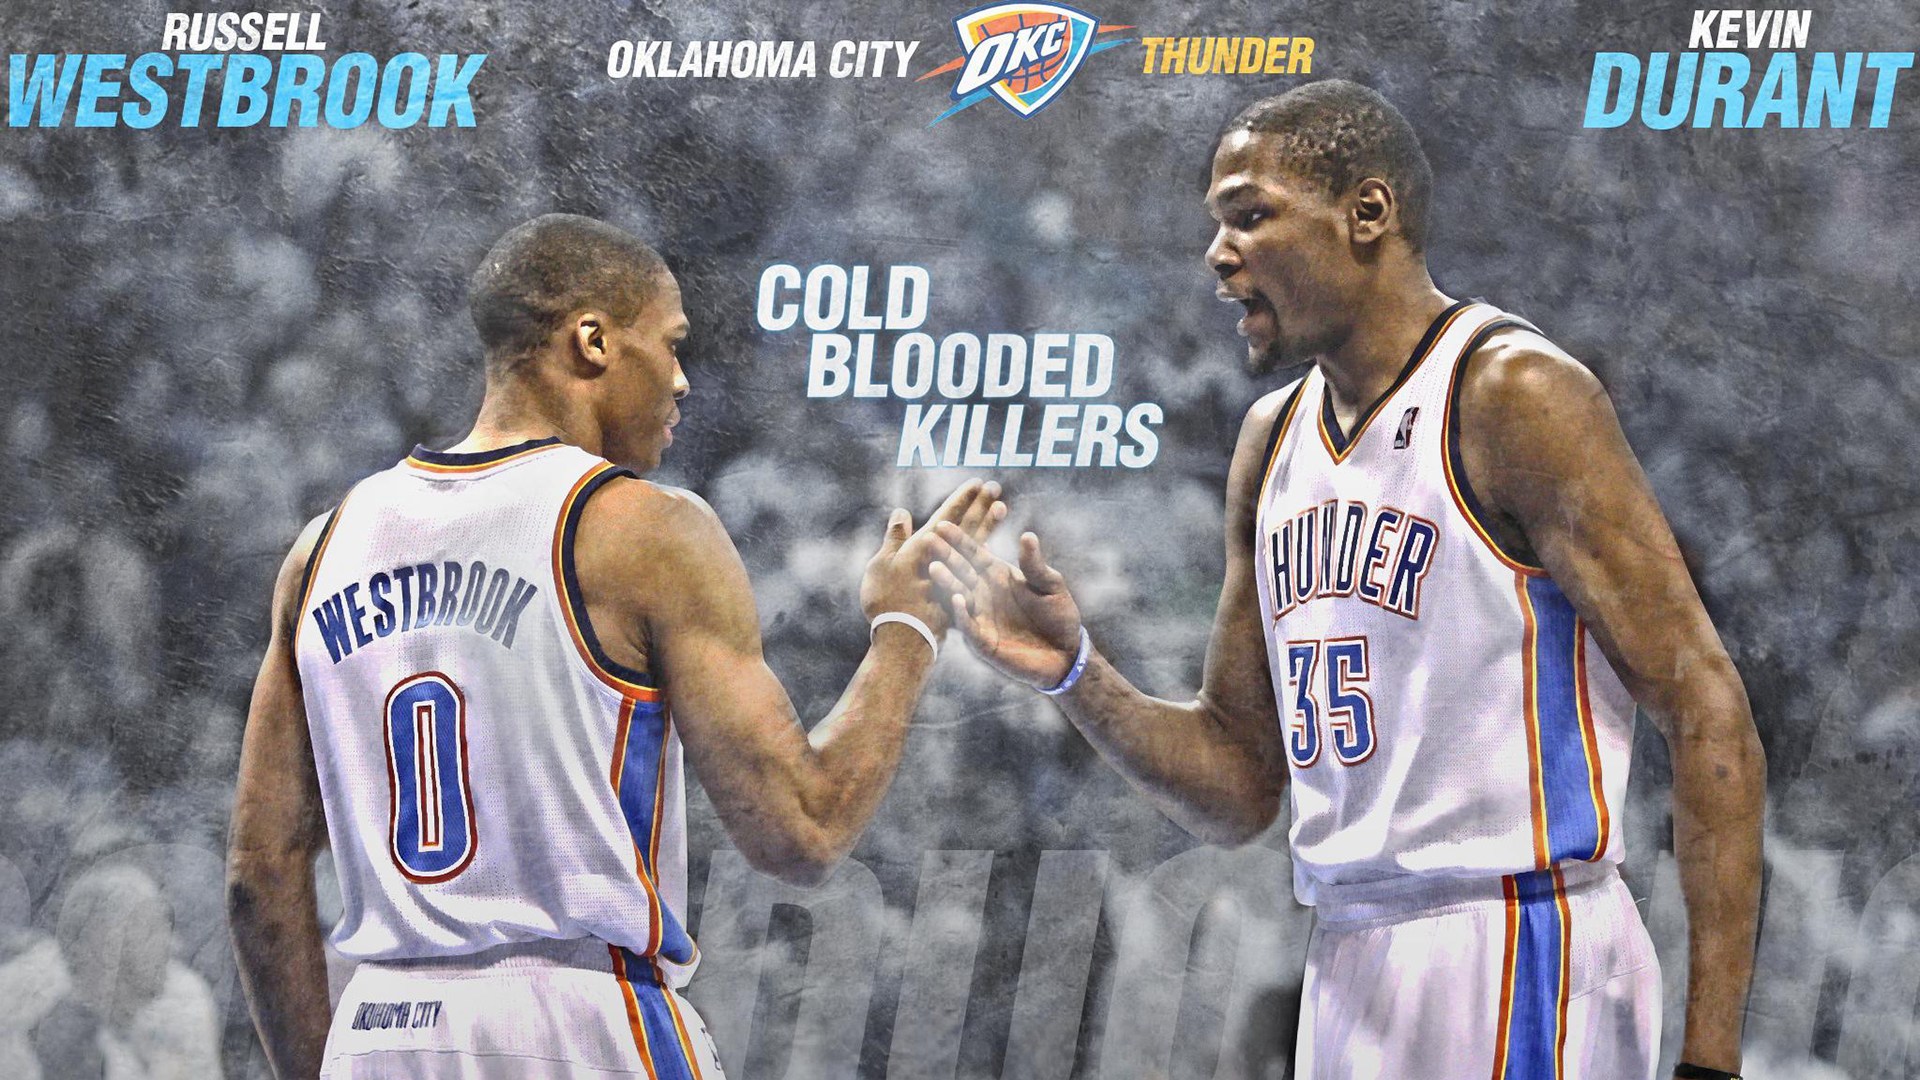 Nba Kevin Durant And Russell Westbrook - HD Wallpaper 